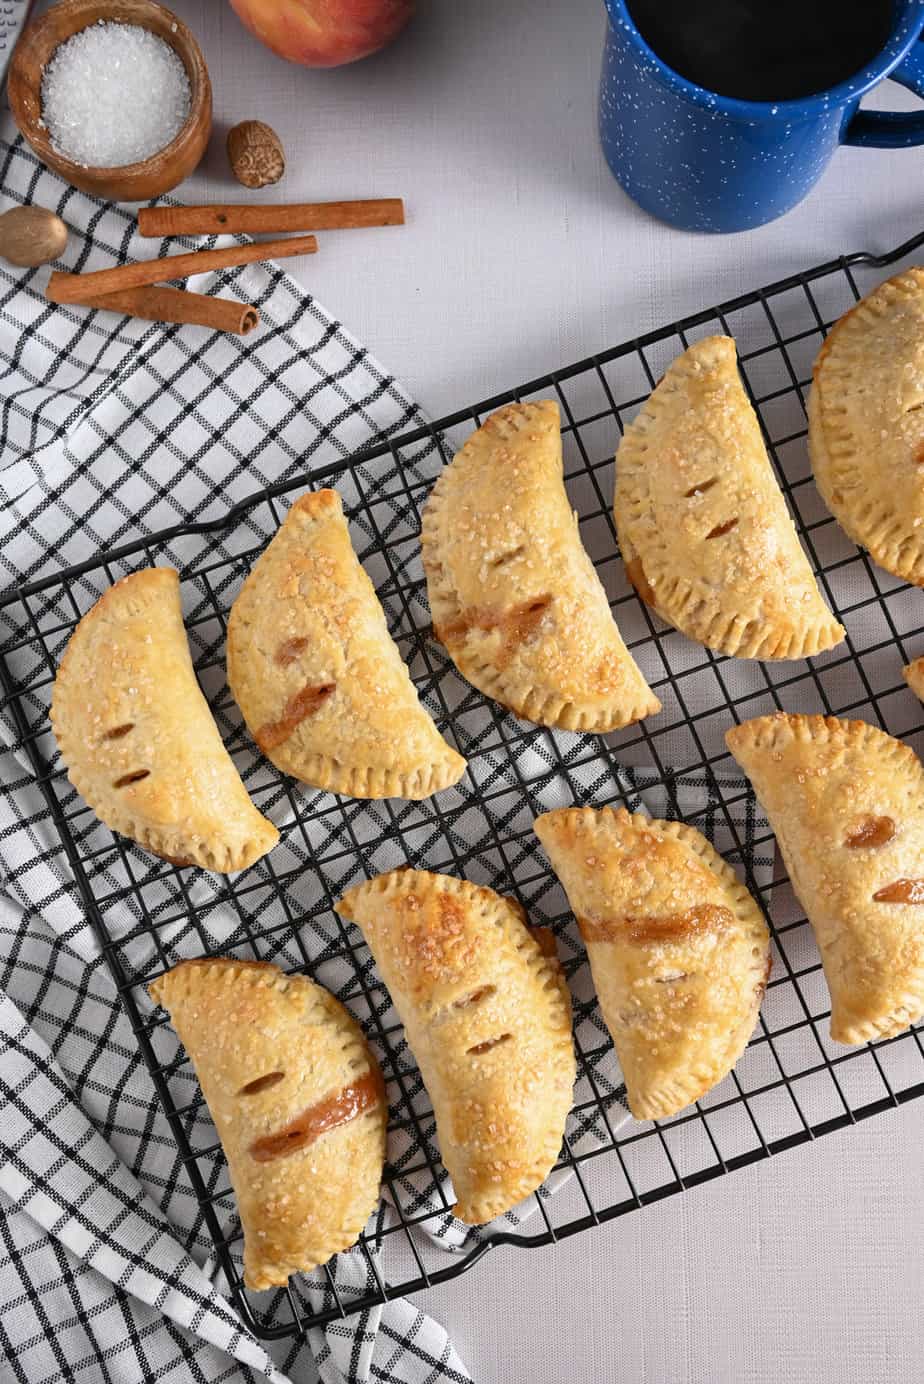 Peach hand pies cooling on a wire rack.